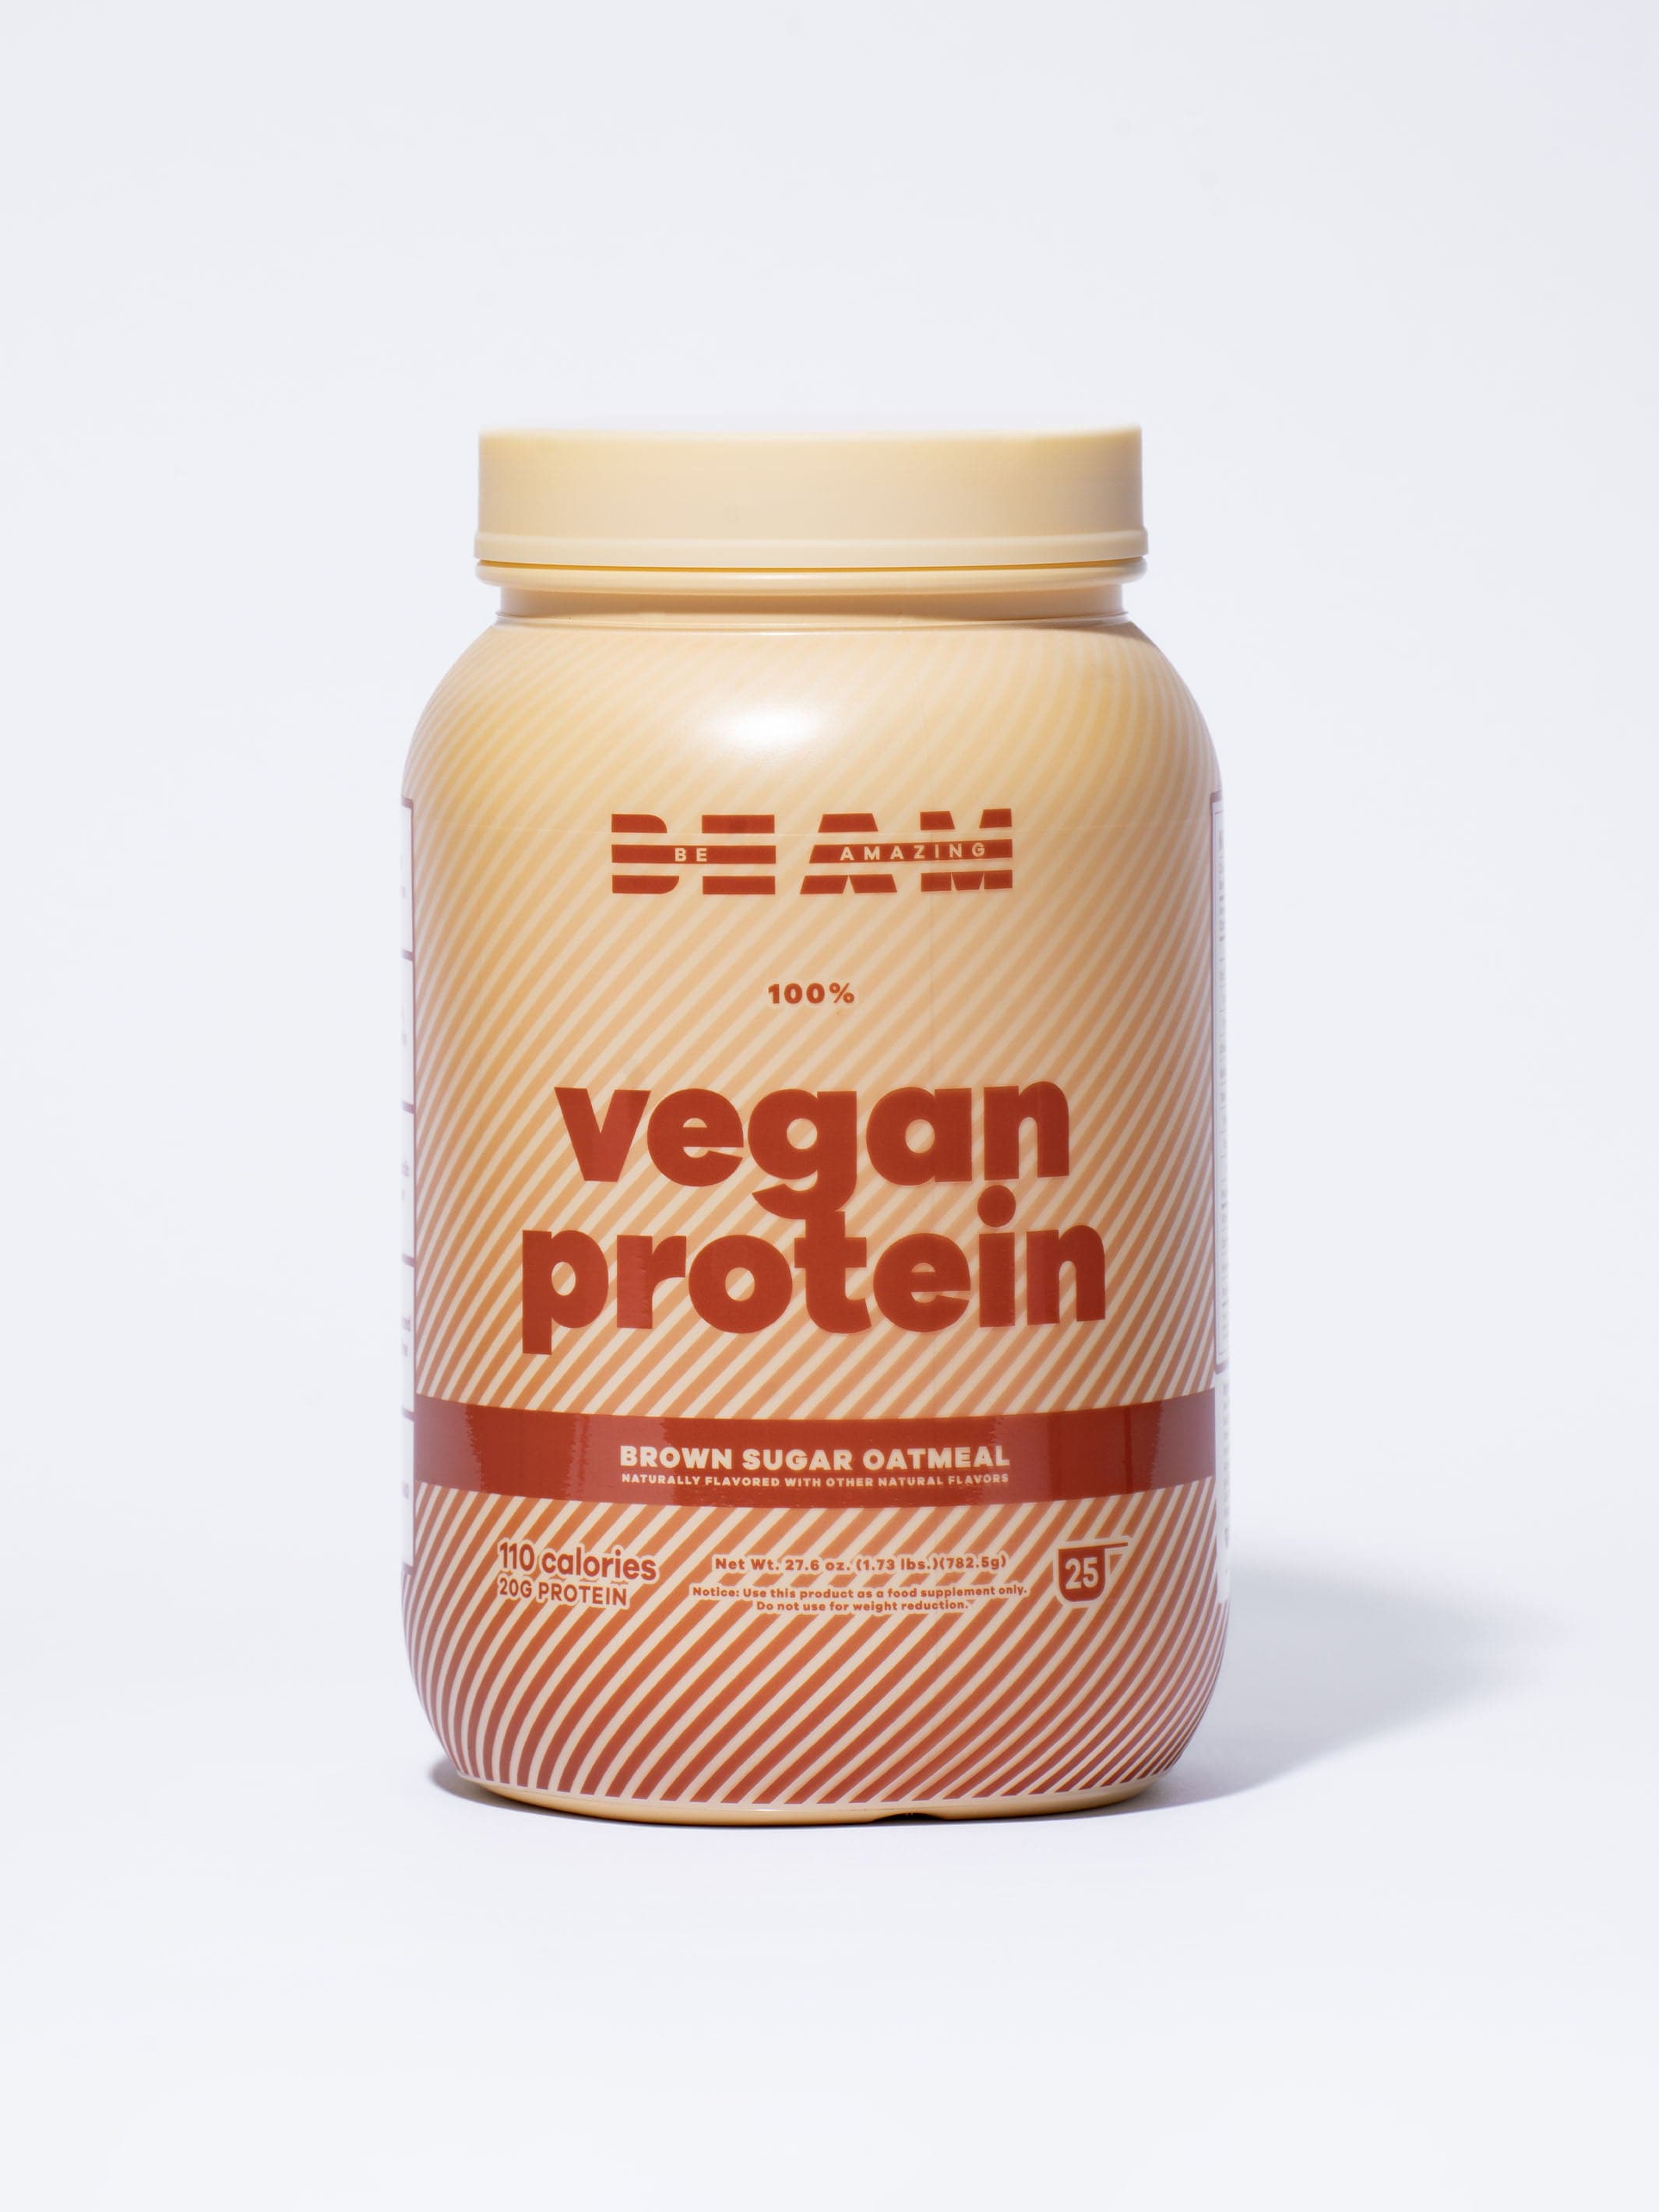 Organic Super Protein Powder for plant-based protein shakes –  marvelloussuperfood